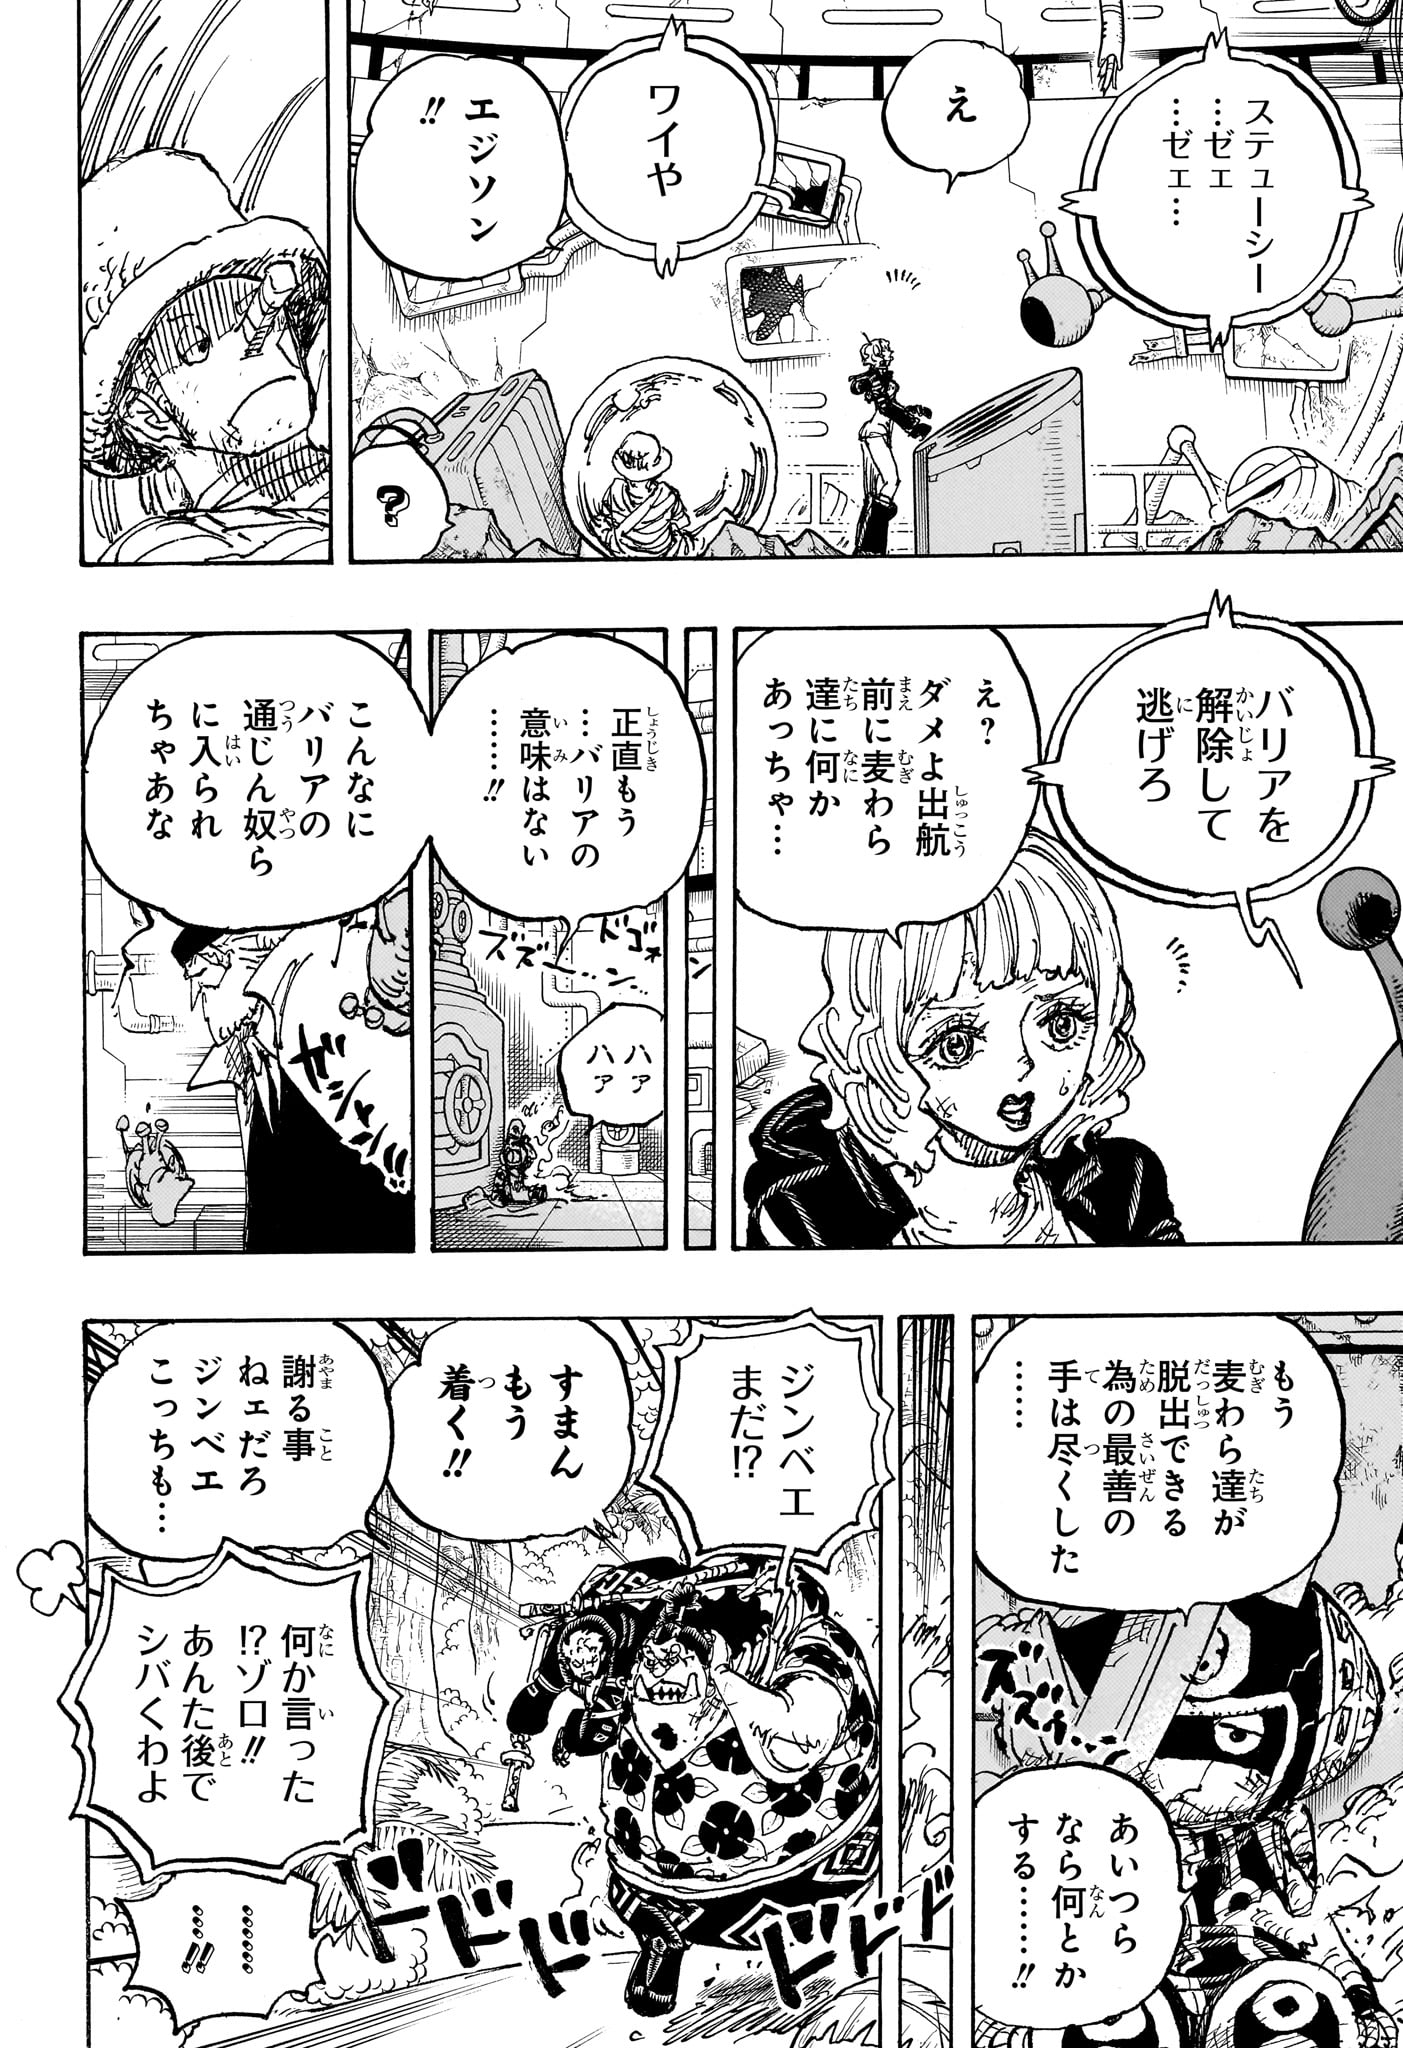 One Piece - Chapter 1115 - Page 6